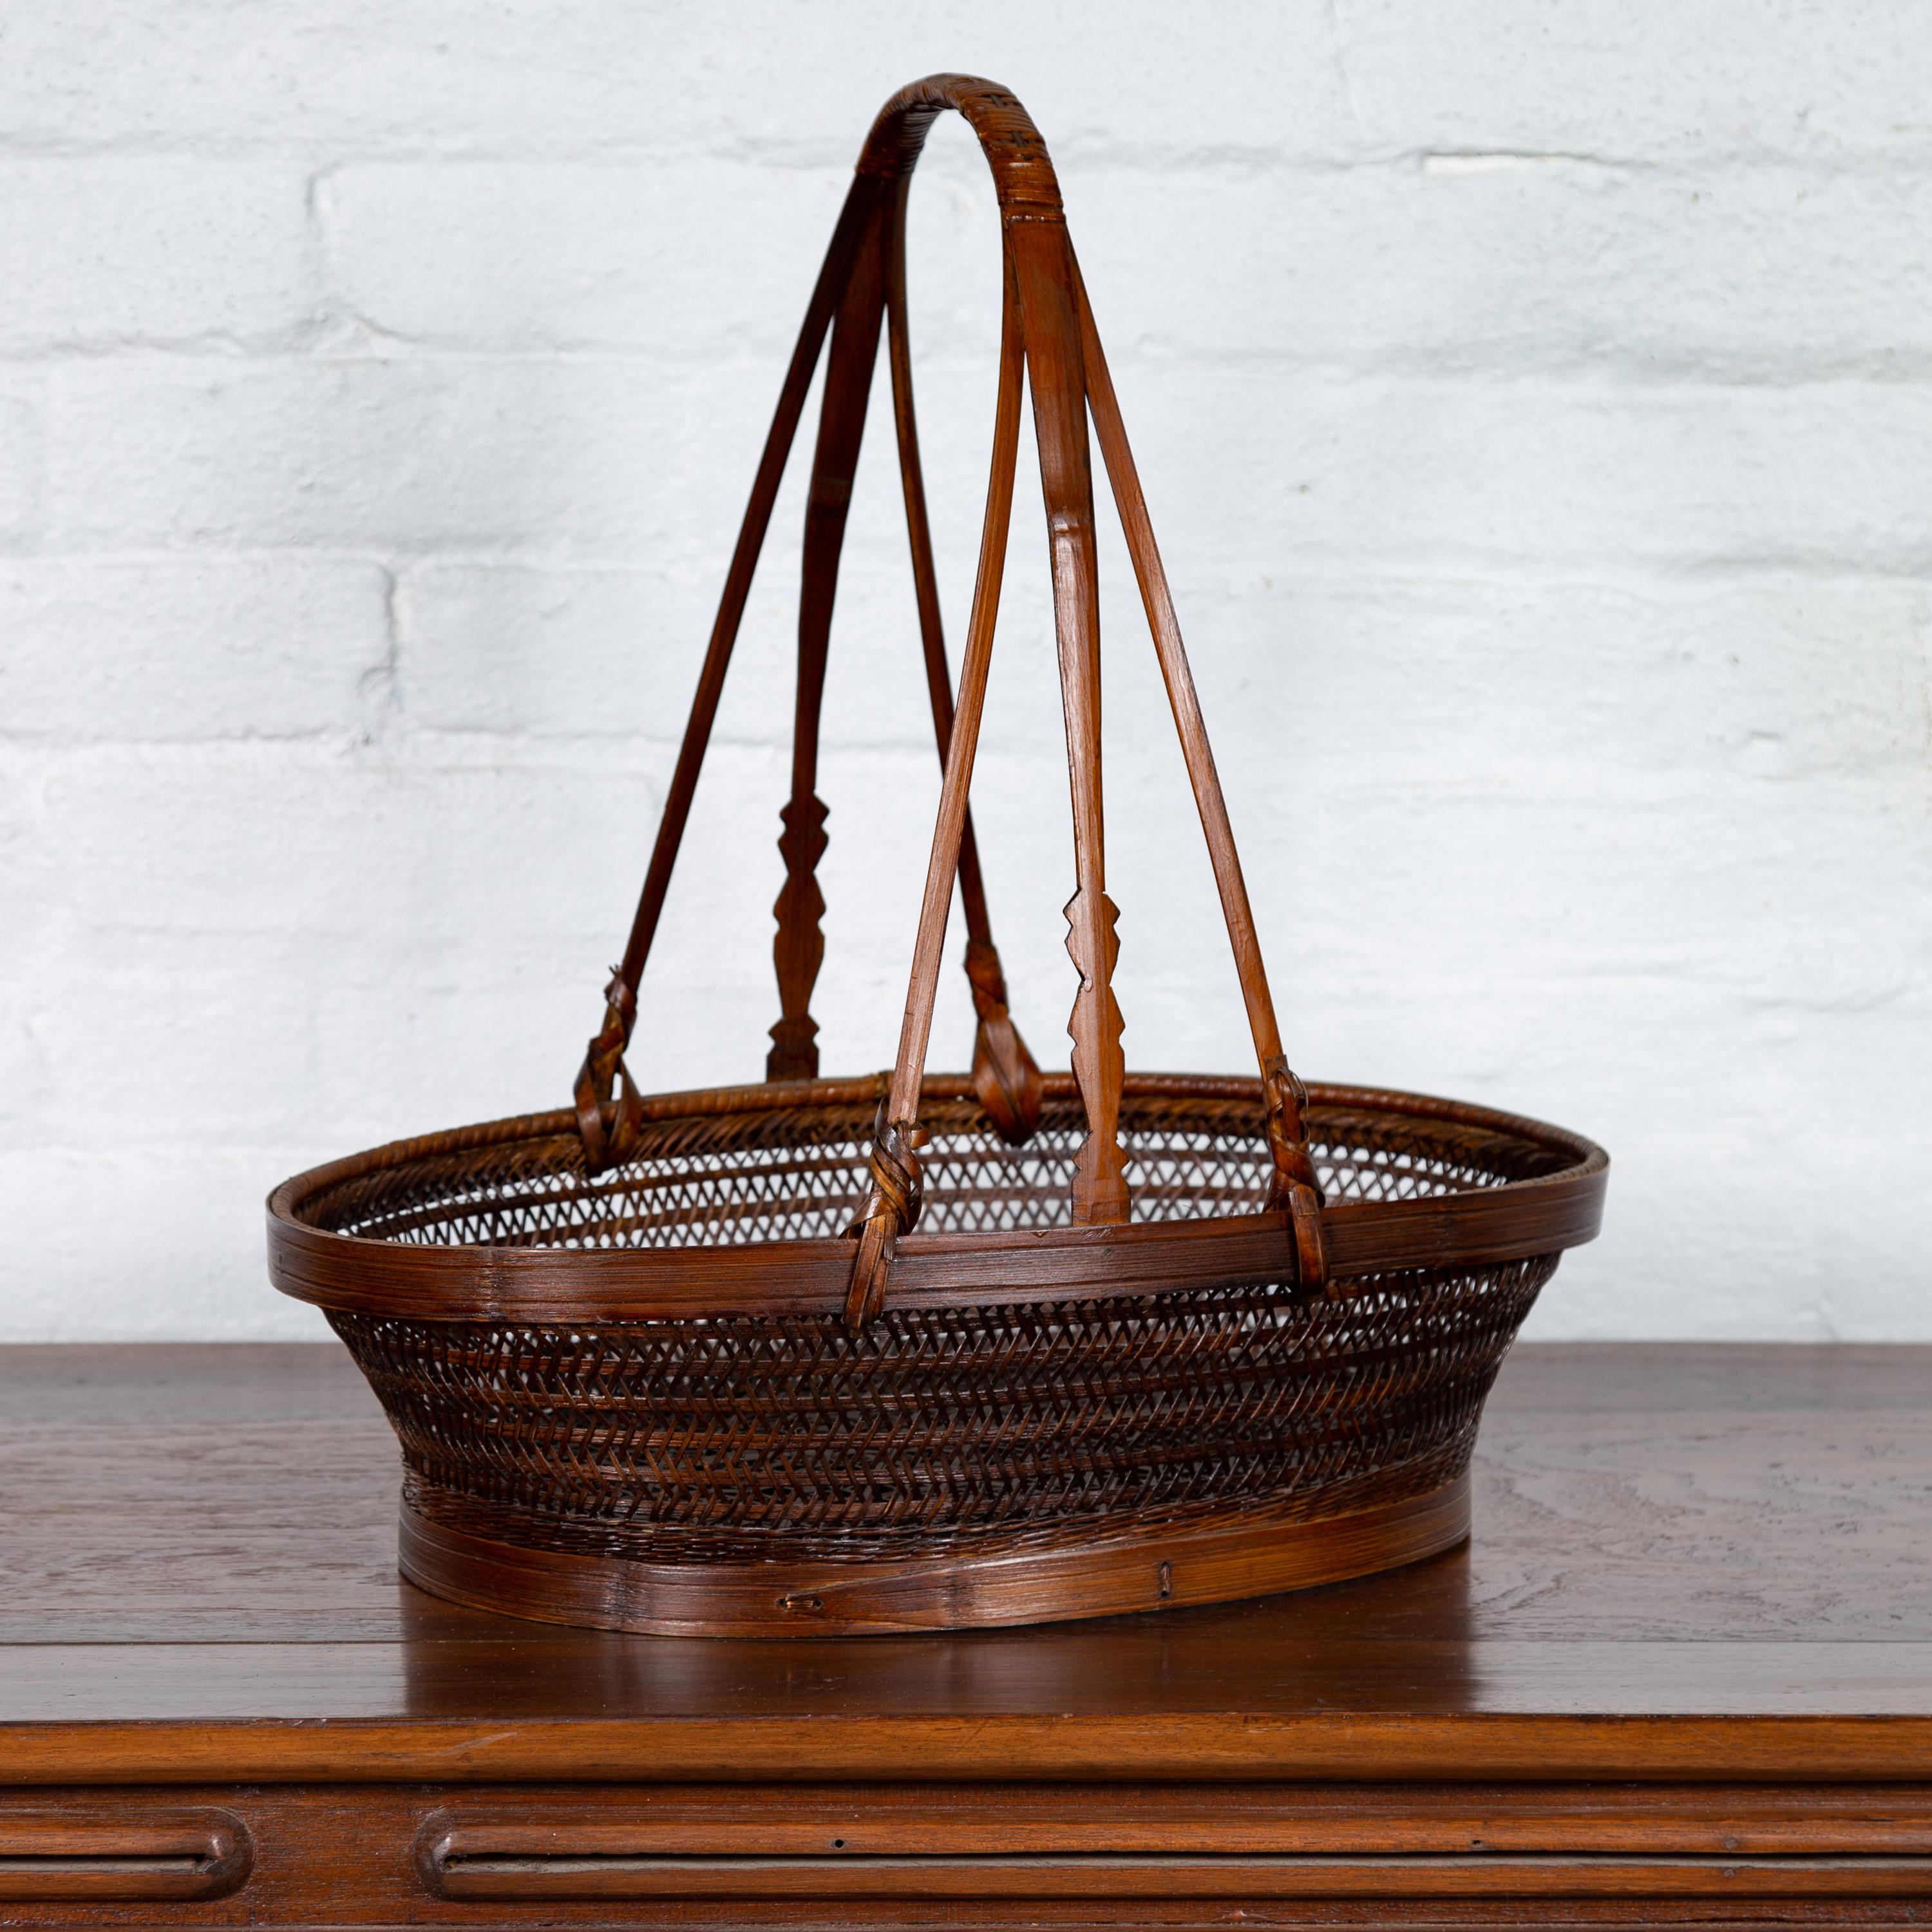 Vintage Woven Rattan Carrying Basket with Large Tripartite Handle In Good Condition For Sale In Yonkers, NY